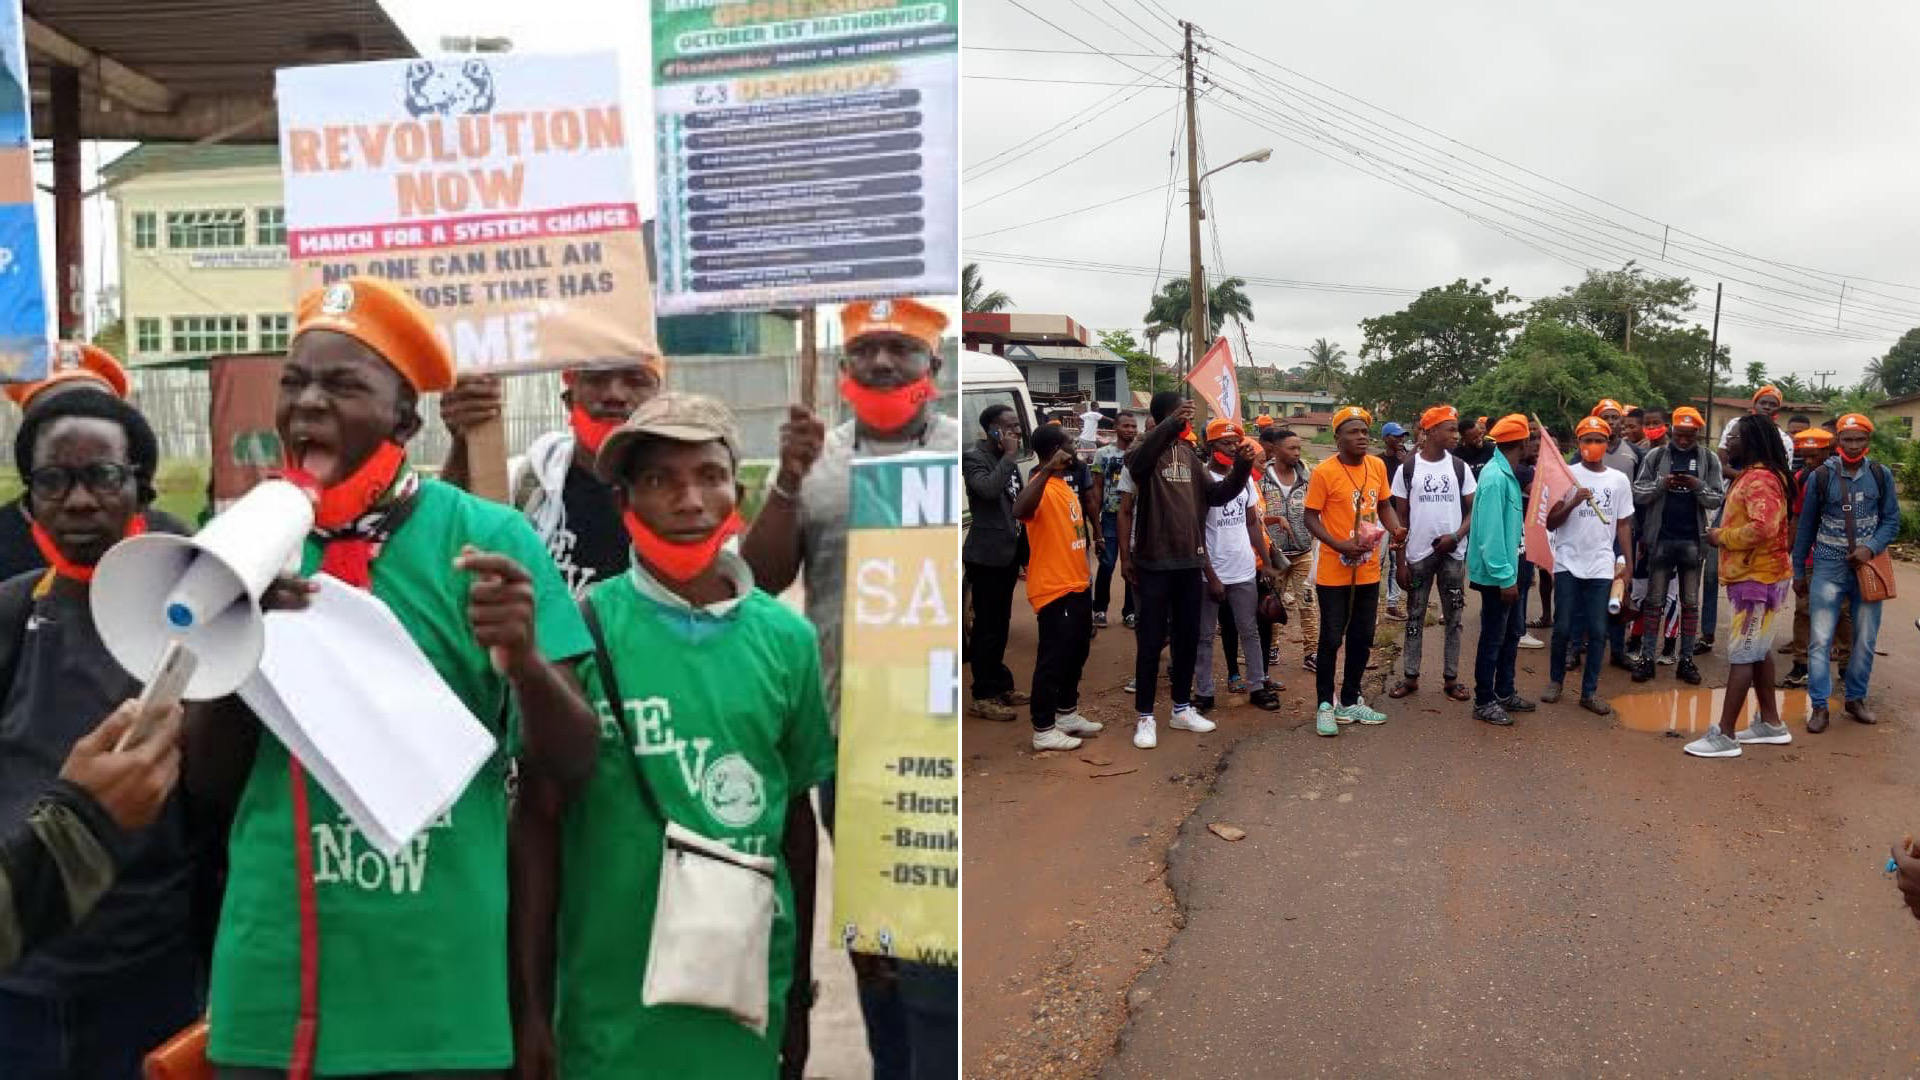 Nigeria@60: RevolutionNow Group Stage Protest In Osogbo Amid Tight Security